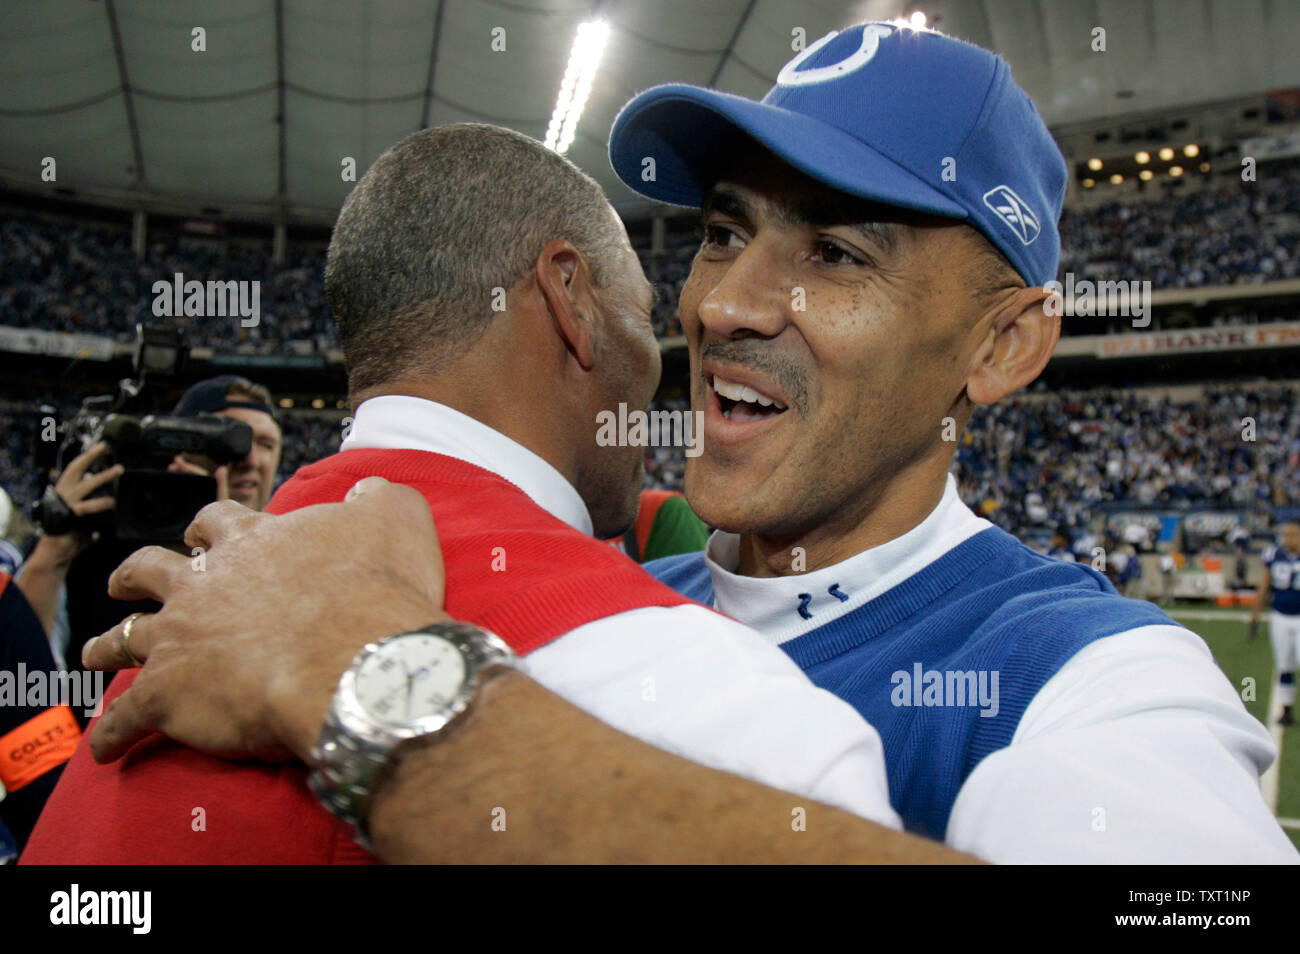 Indianapolis Colts head coach Tony Dungy, right, hugs Kansas City Chiefs head coach Herm Edwards after the Colts defeated the Chiefs 13-10 at the RCA Dome in Indianapolis on November 18, 2007. (UPI Photo/Mark Cowan) Stock Photo